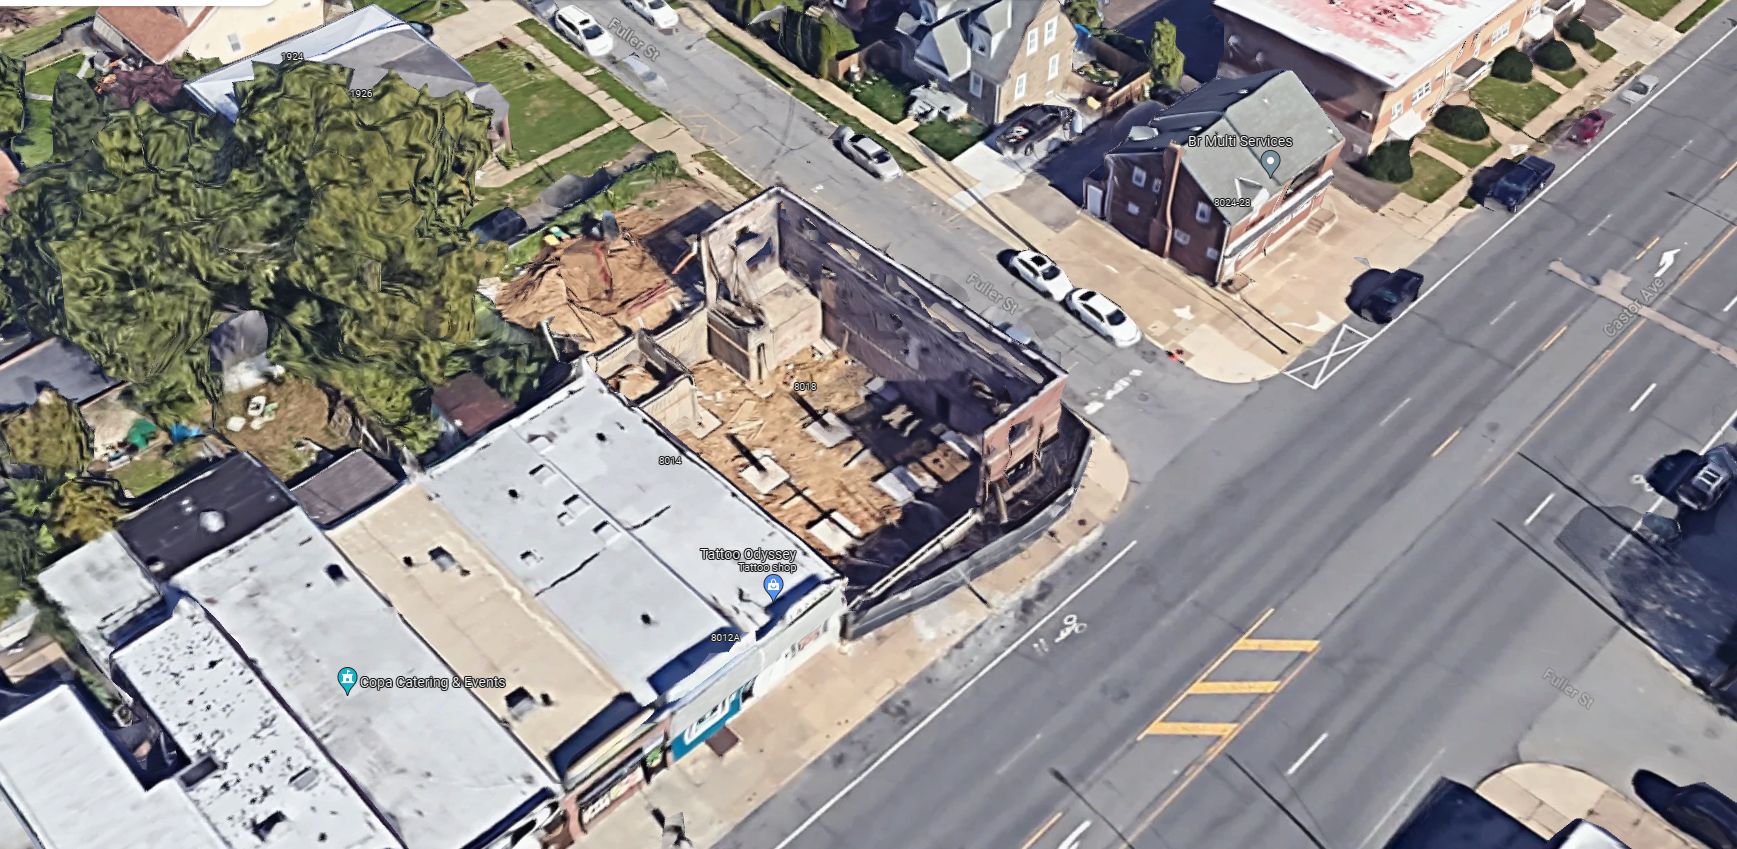 8014 Castor Avenue during renovation. Aerial view. Looking north. Credit: Google Maps